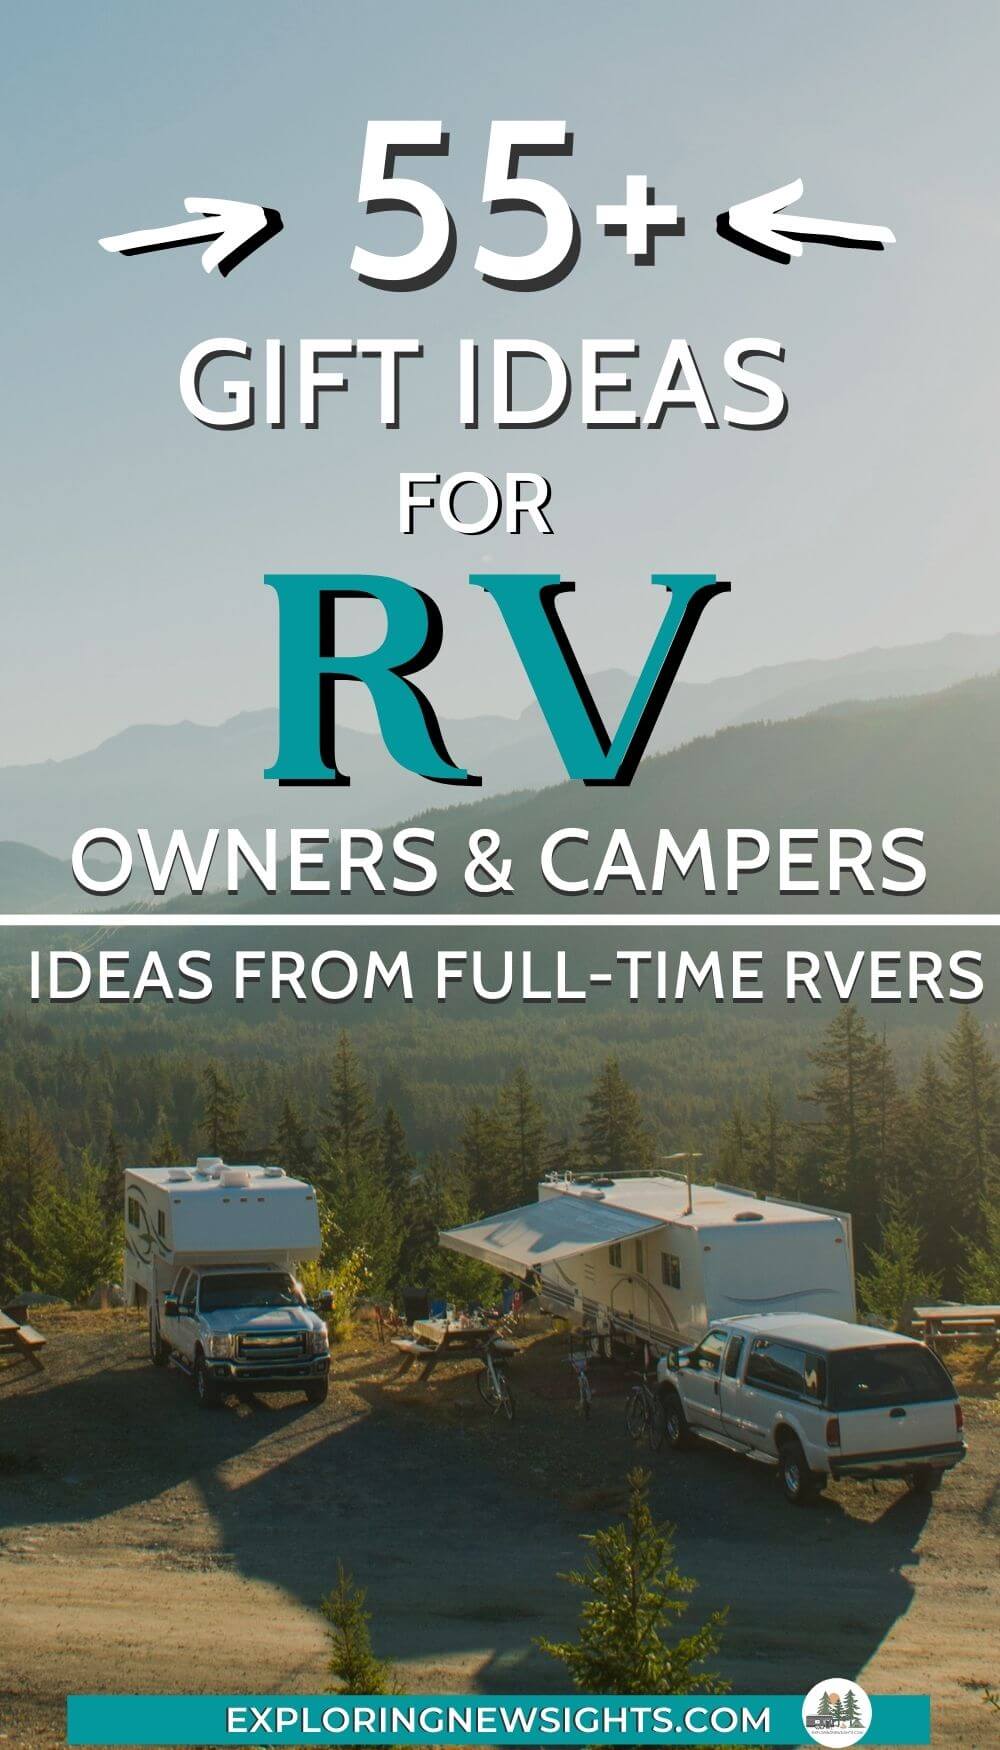 Gift Ideas for RV Owners 